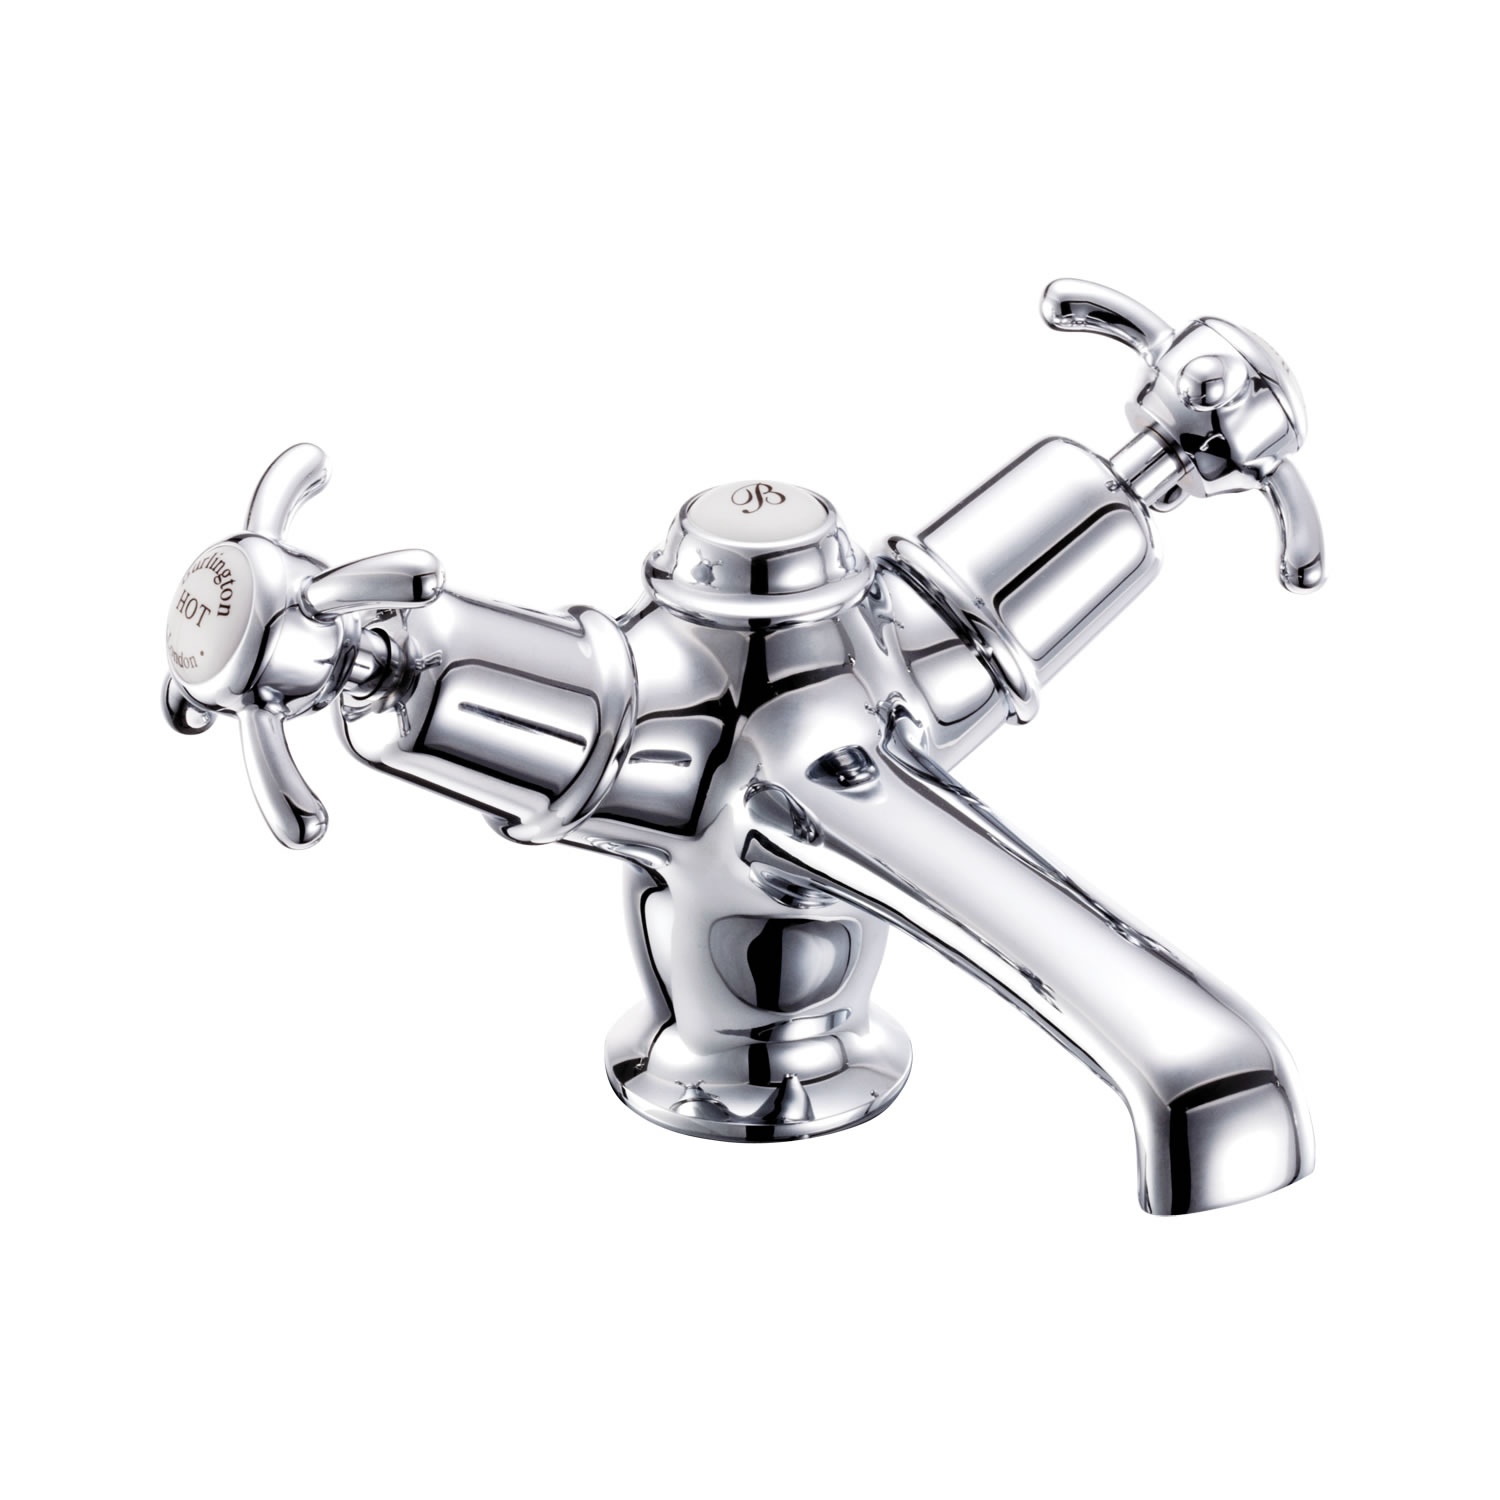 Anglesey basin mixer with low central indice with click-clack waste